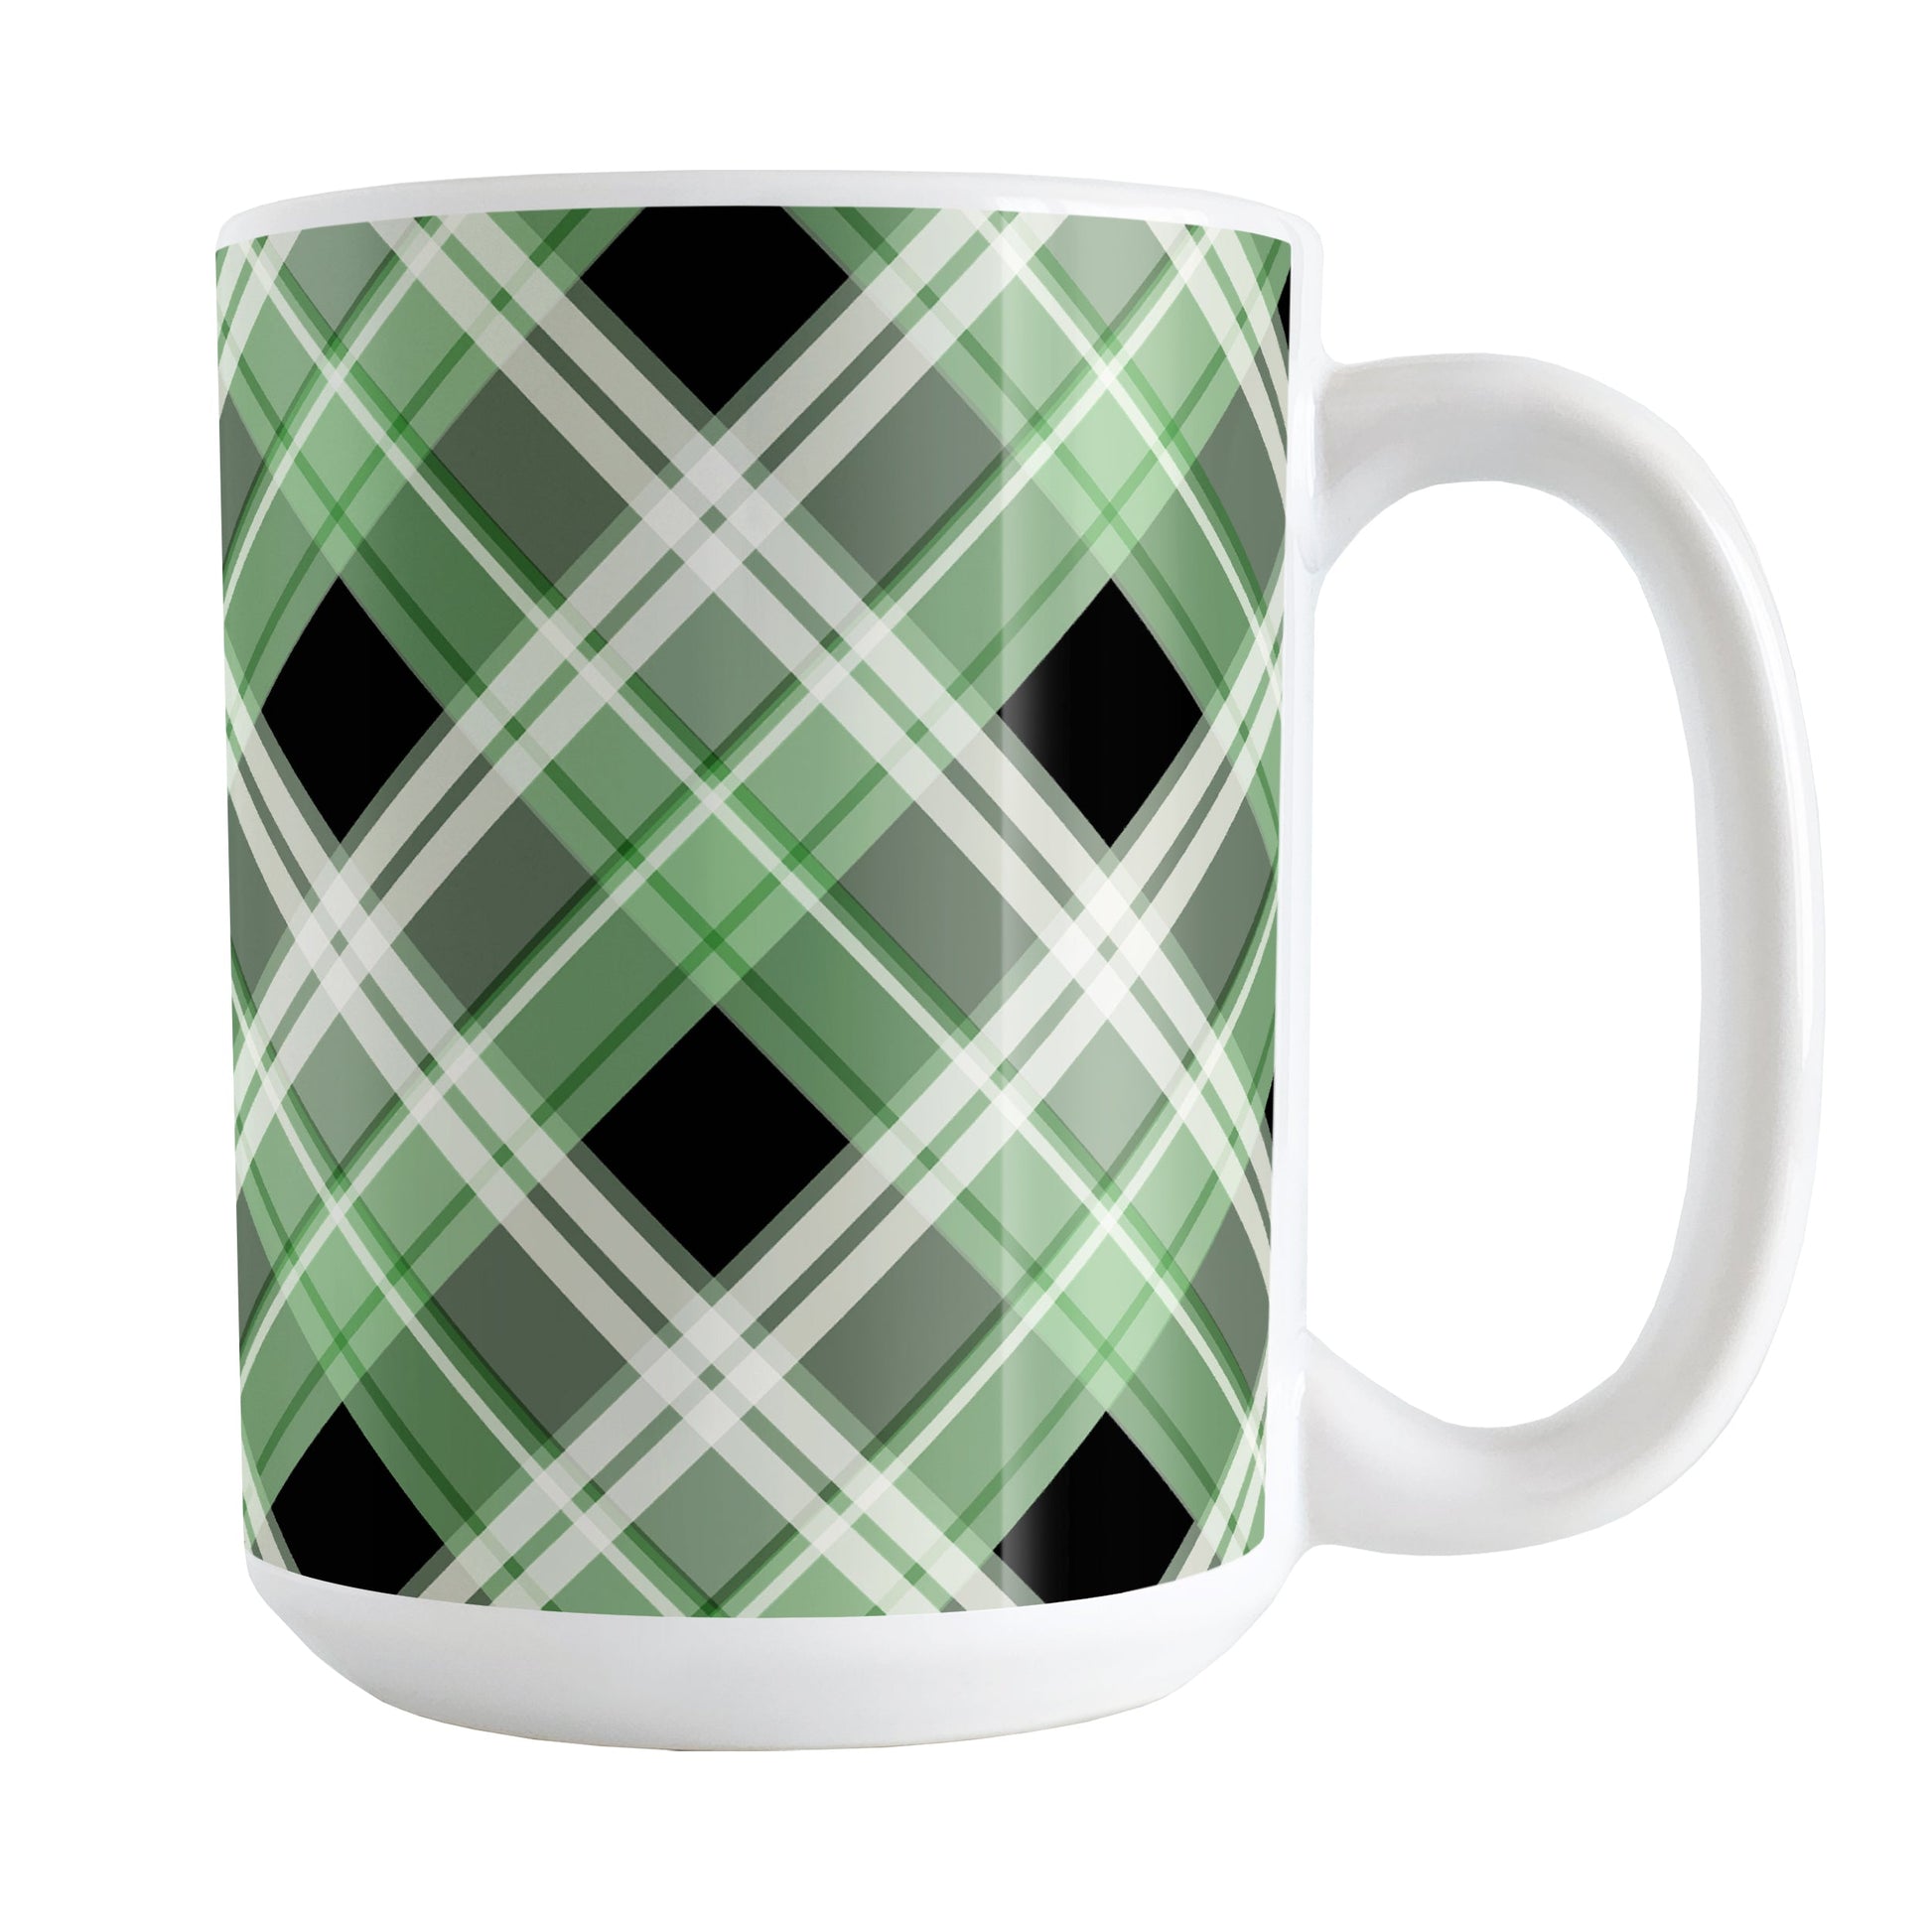 Alternative Green Plaid Mug (15oz) at Amy's Coffee Mugs. A ceramic coffee mug designed with a diagonal green, black, and white plaid pattern that wraps around the mug to the handle. Designed for someone who loves plaid patterns and is a fan of the color green.